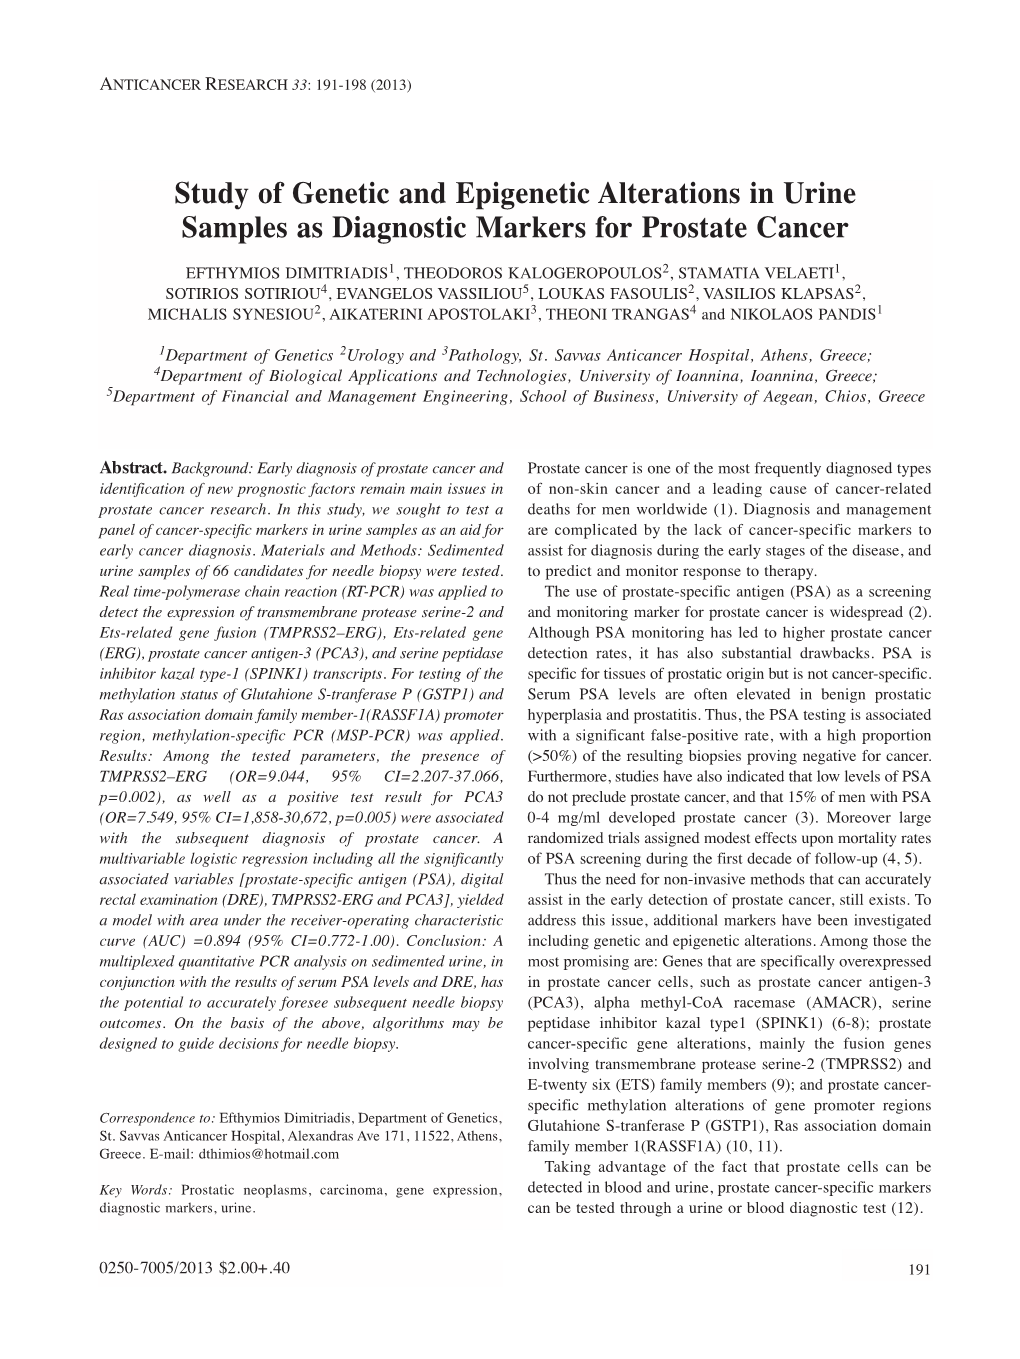 Study of Genetic and Epigenetic Alterations in Urine Samples As Diagnostic Markers for Prostate Cancer